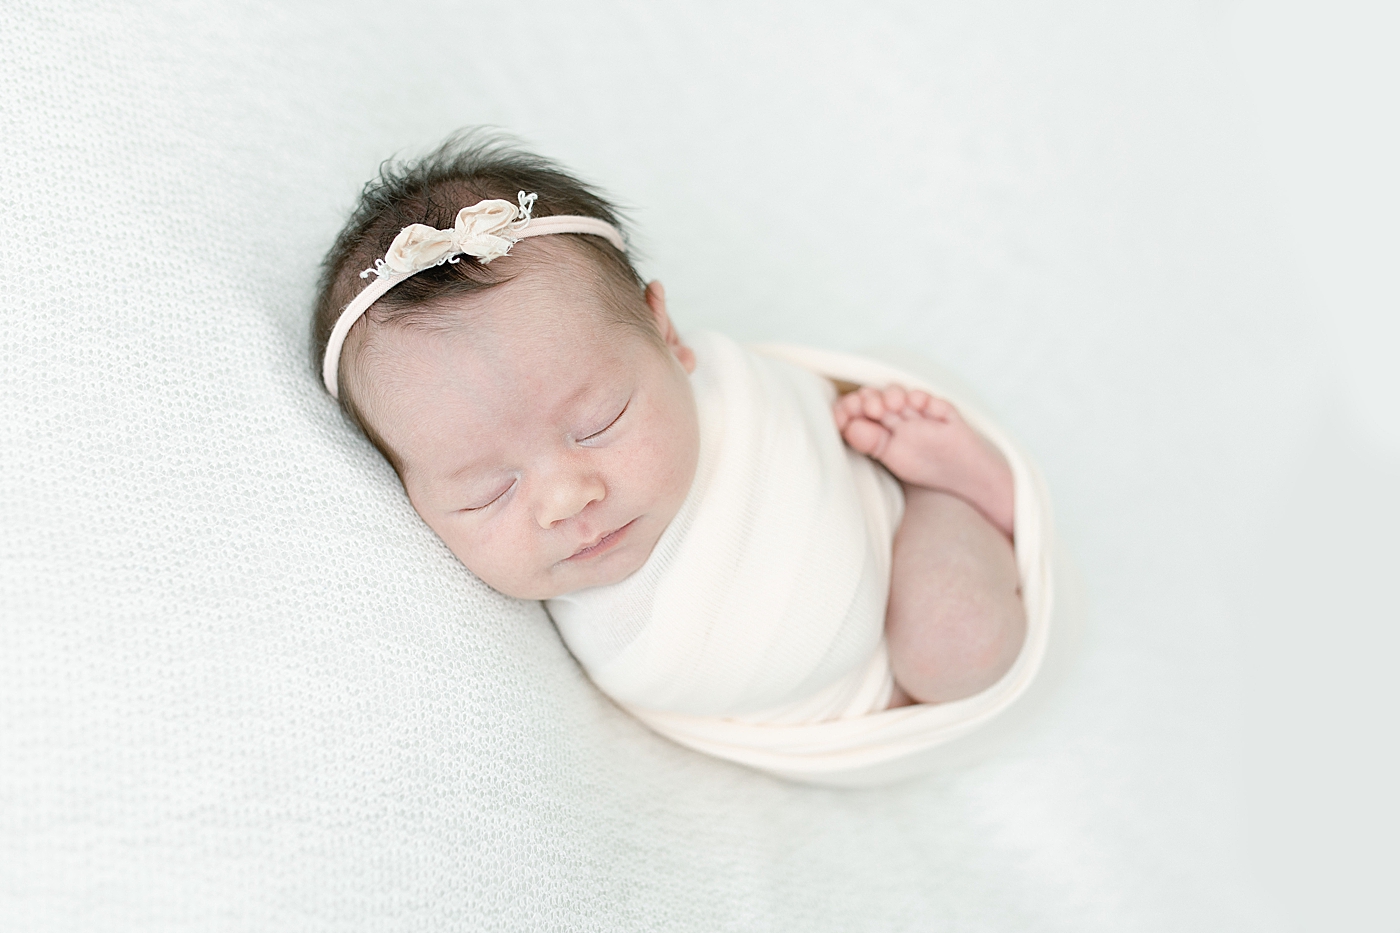 Baby girl swaddled for newborn session. Photo by Little Sunshine Photography